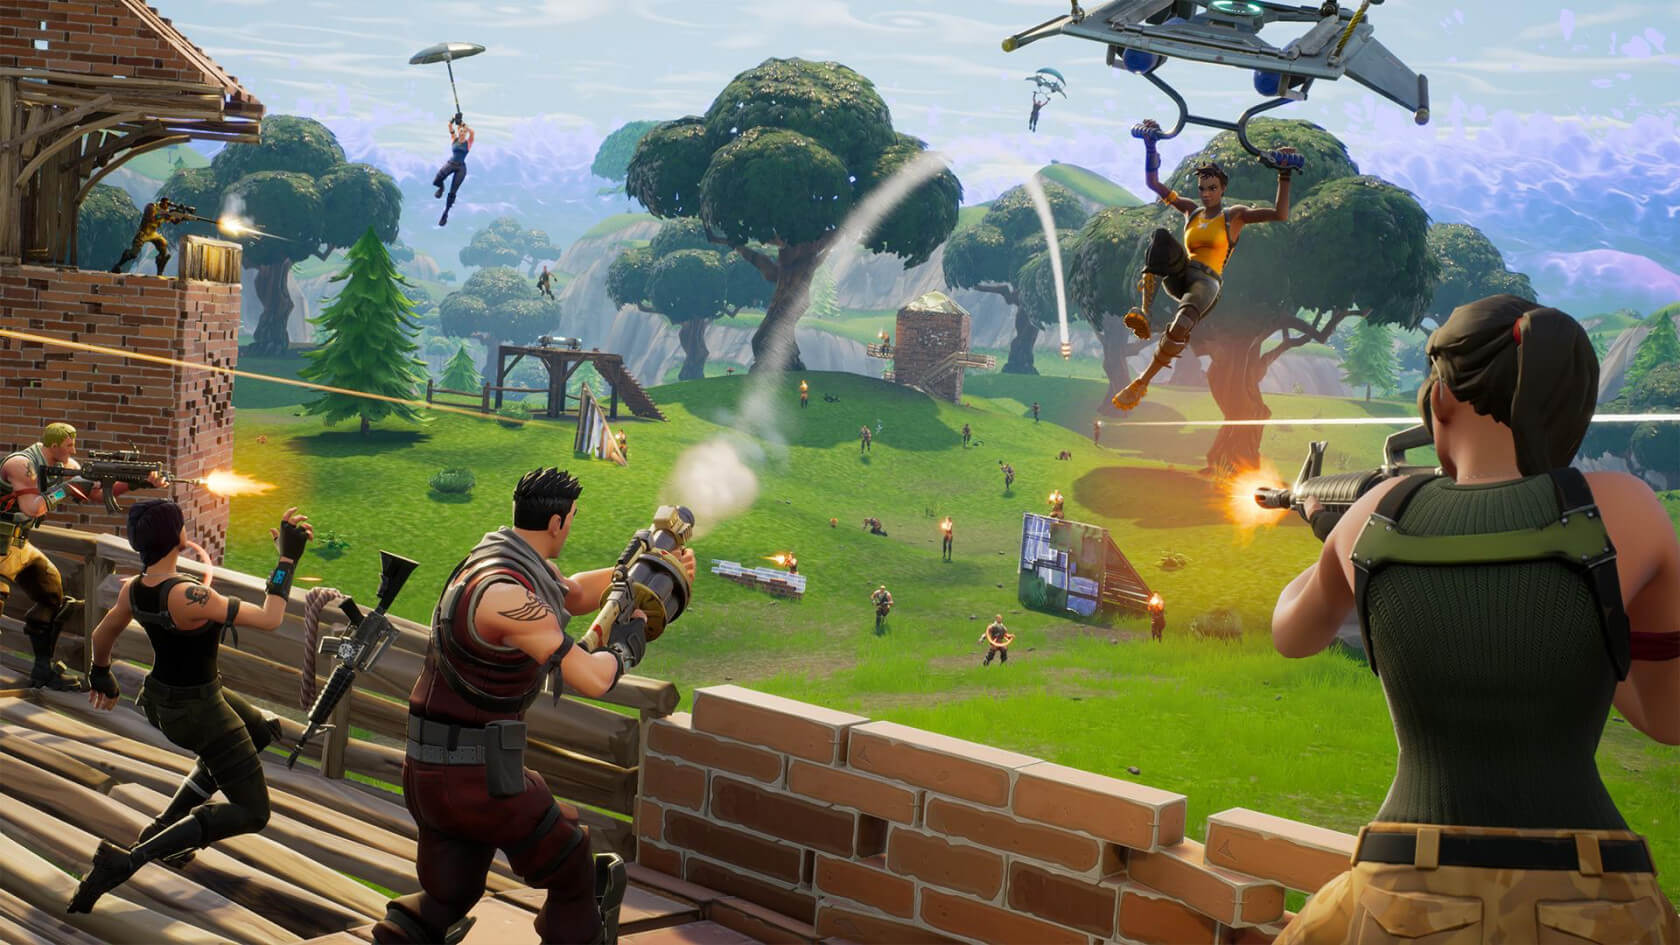 French company asks candidates to play Fortnite during job interviews